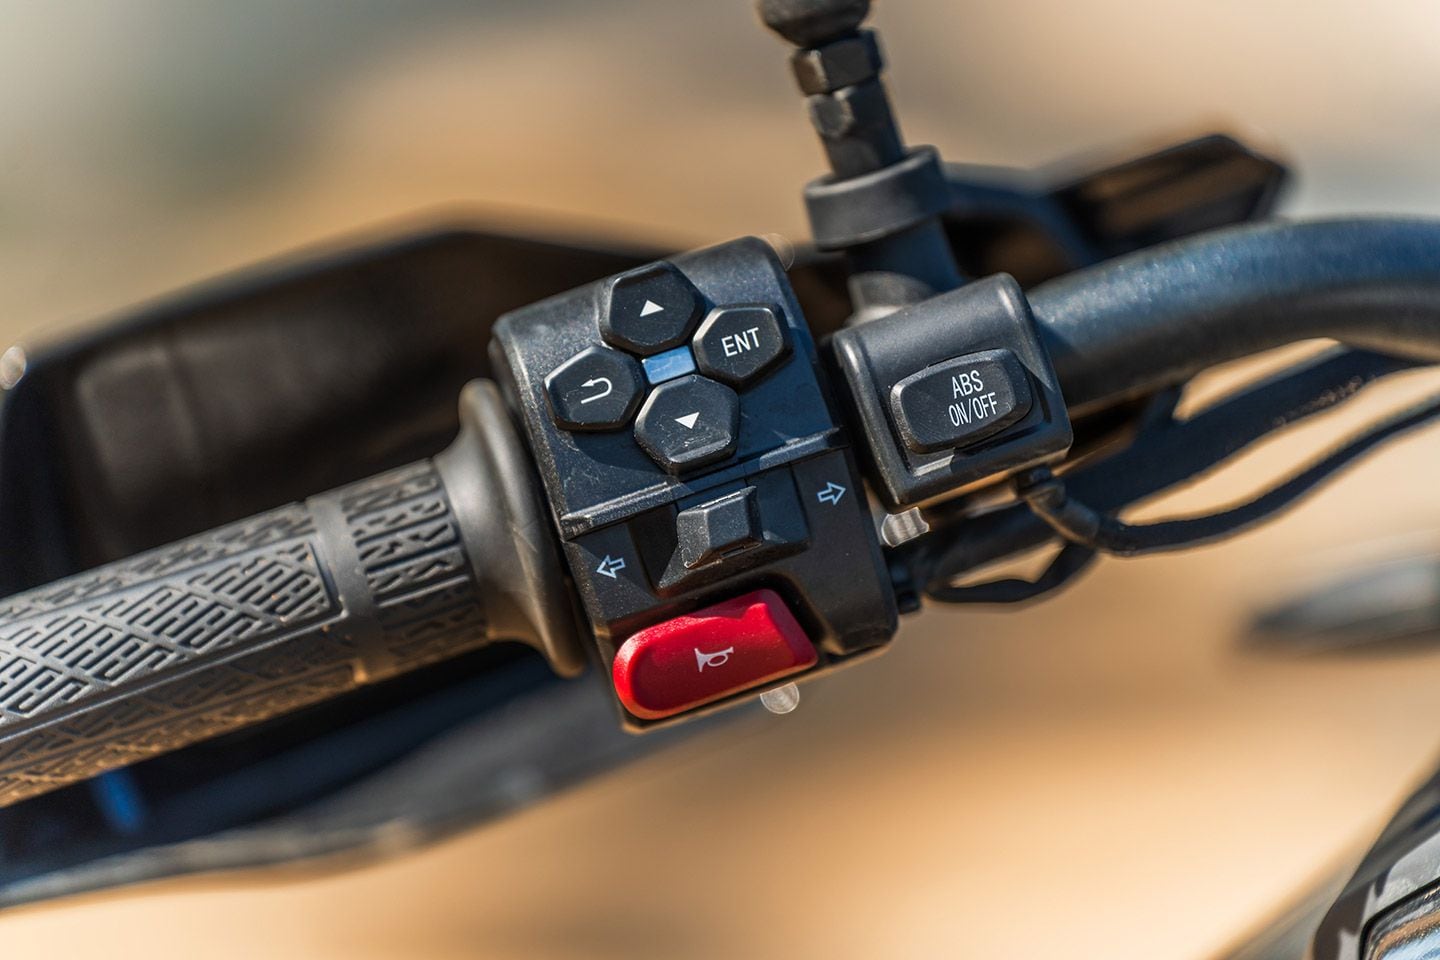 Switches have a KTM feel to them and are quite intuitive, though admittedly, there’s not a lot to adjust on the Ibex 450. No ride modes, but you do get switchable ABS and traction control, which are easily cycled via this switch on the handlebar.